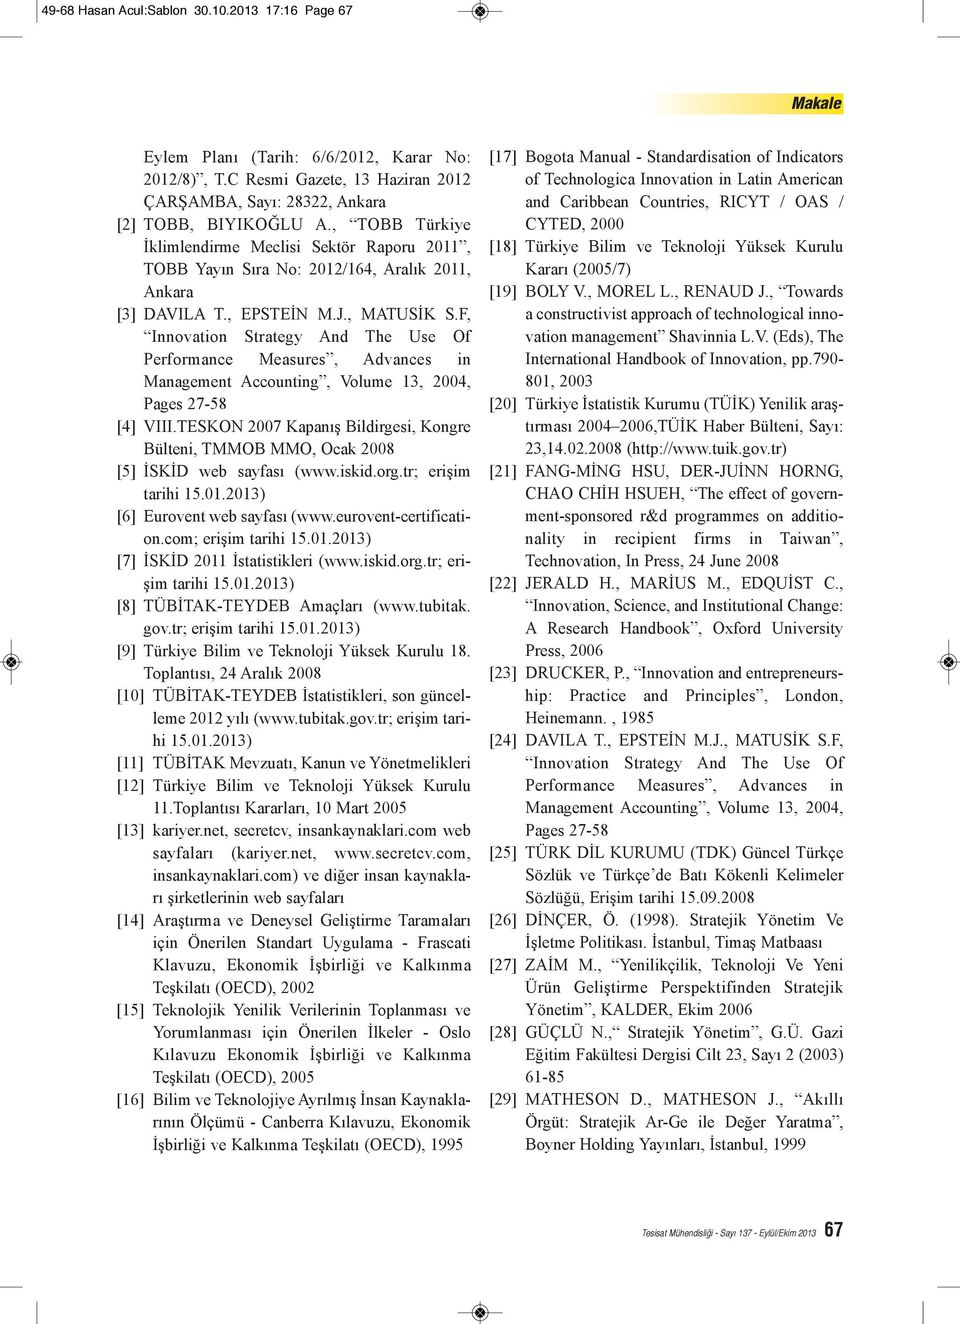 F, Innovation Strategy And The Use Of Performance Measures, Advances in Management Accounting, Volume 13, 2004, Pages 27-58 [4] VIII.